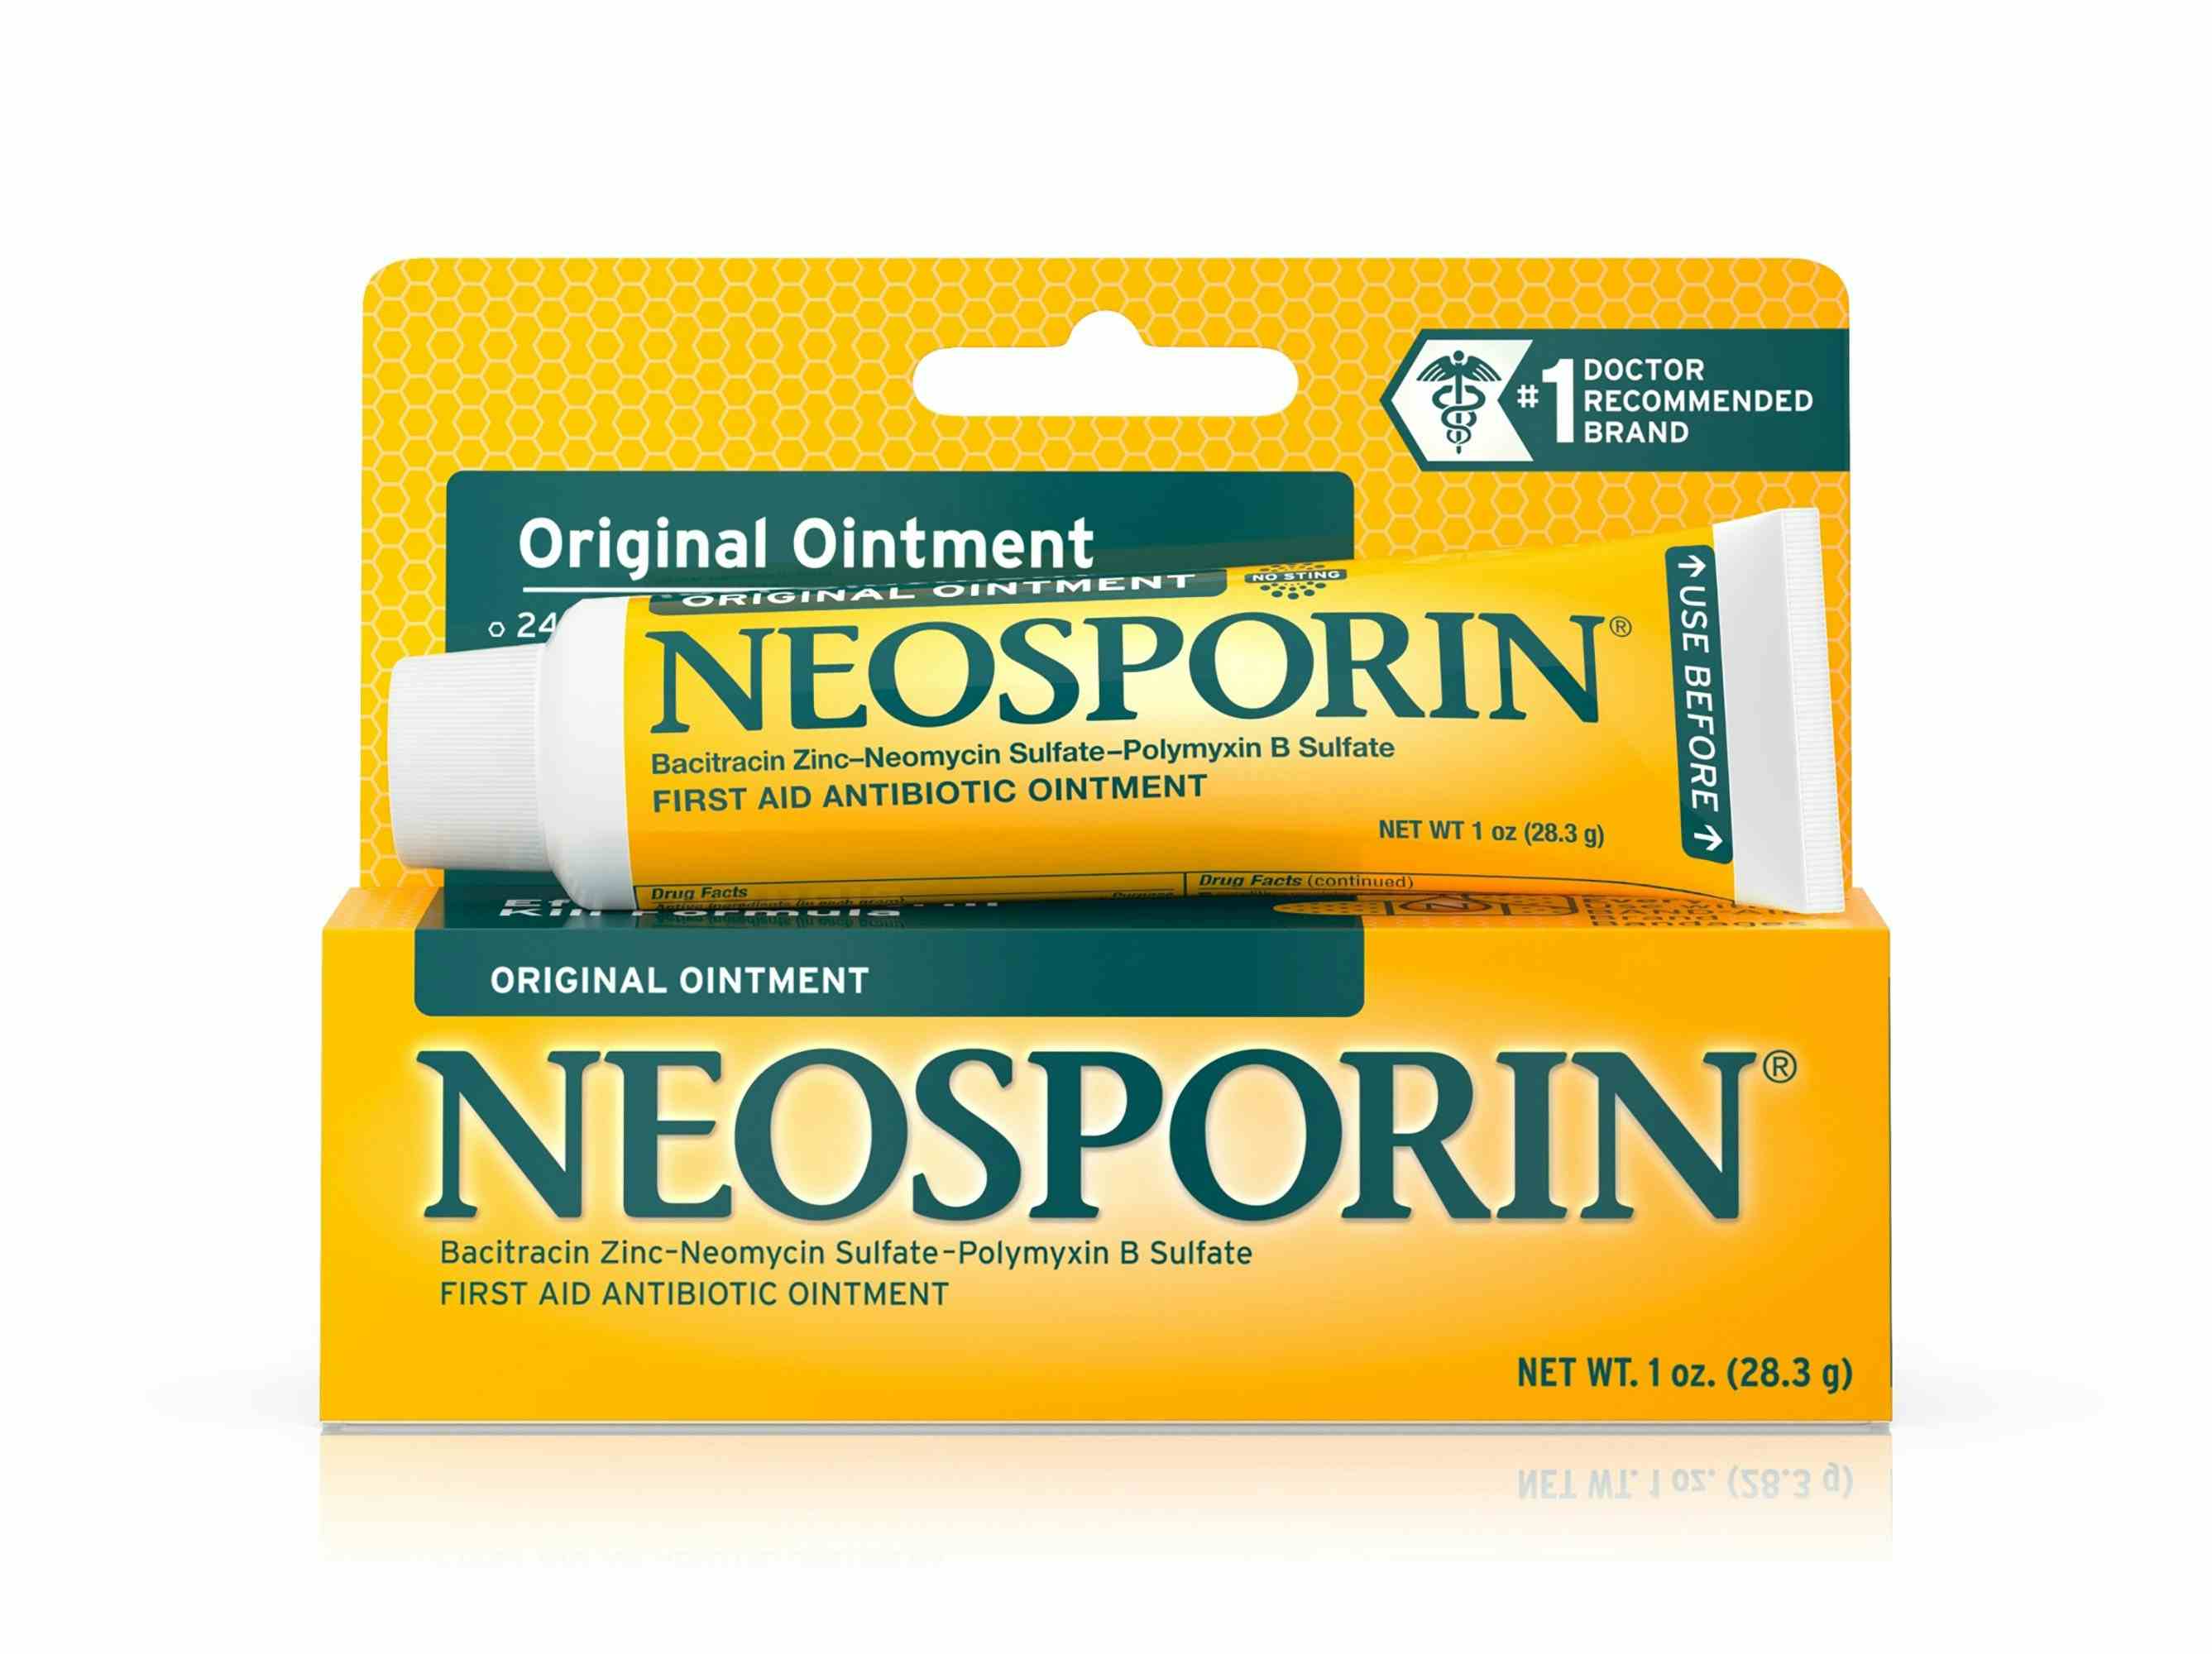 Neosporin First Aid Antibiotic Ointment, 00300810237376, 1 Tube